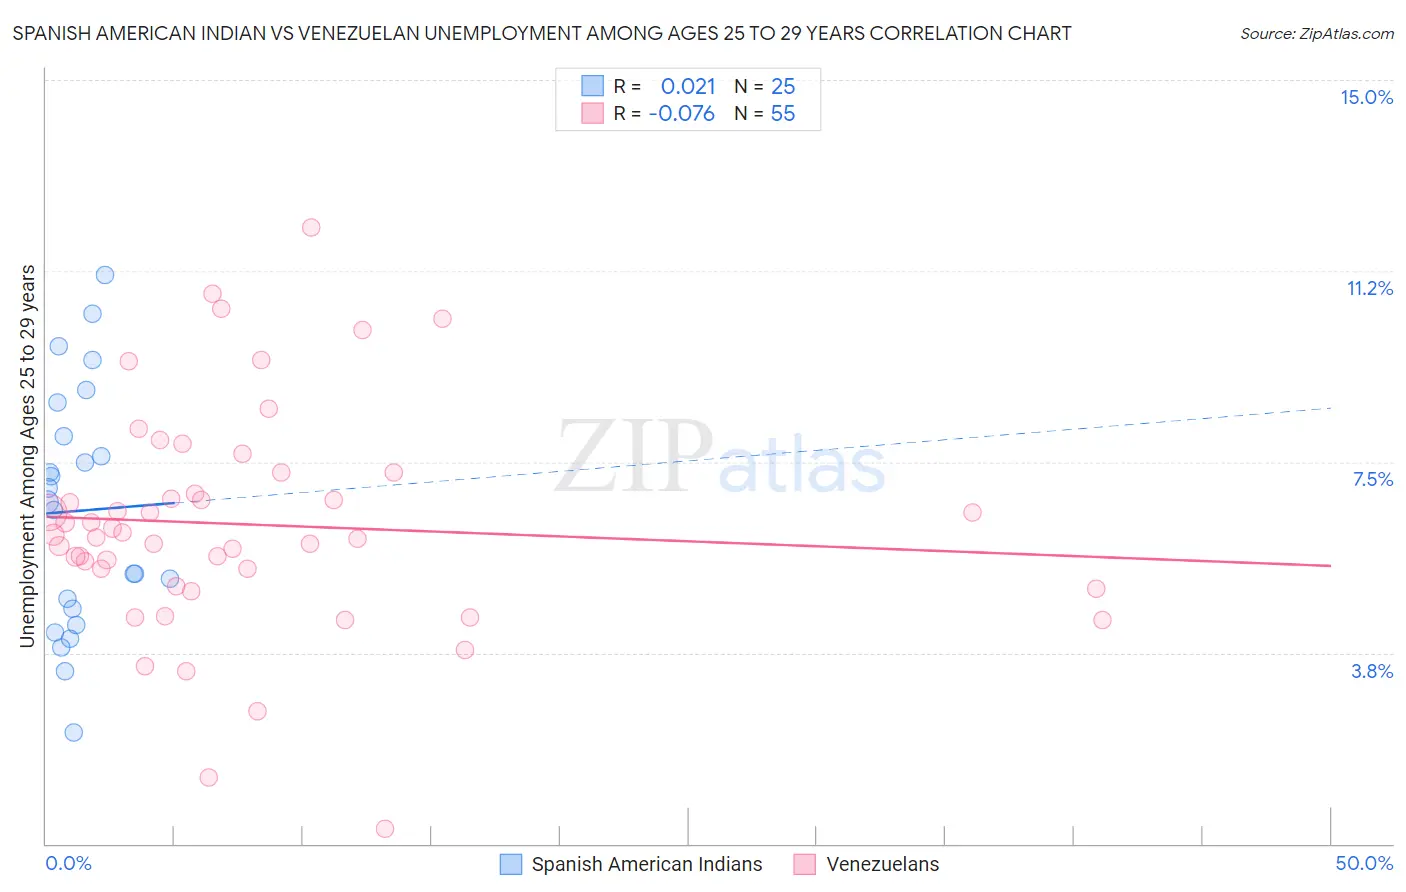 Spanish American Indian vs Venezuelan Unemployment Among Ages 25 to 29 years